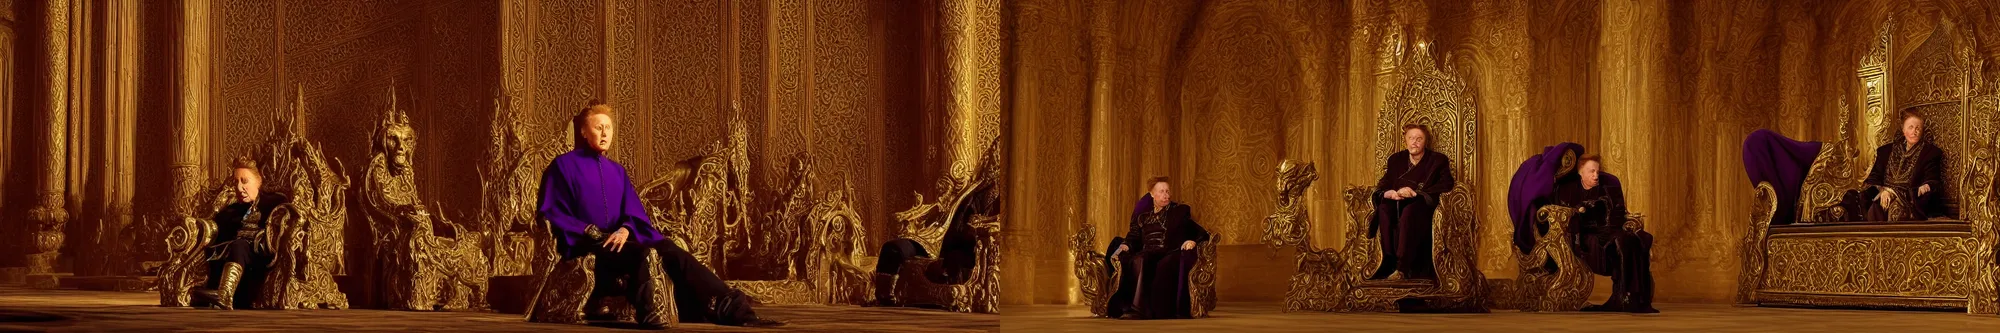 Prompt: Film still of Christopher Walken as Emperor Shaddam IV (Dune) sitting on a throne at the end of a dark long Romanesque marble-hall, volumetric sunlight shines through ornate windows casting shadows, throne made of green quartz and gold with lion-shaped-arm-rests, Christopher Walken is wearing ornate Tyrian-purple regal leather uniform with two lion-pins made of gold, dark atmospheric lighting, highly detailed, cinematography by Ridley Scott